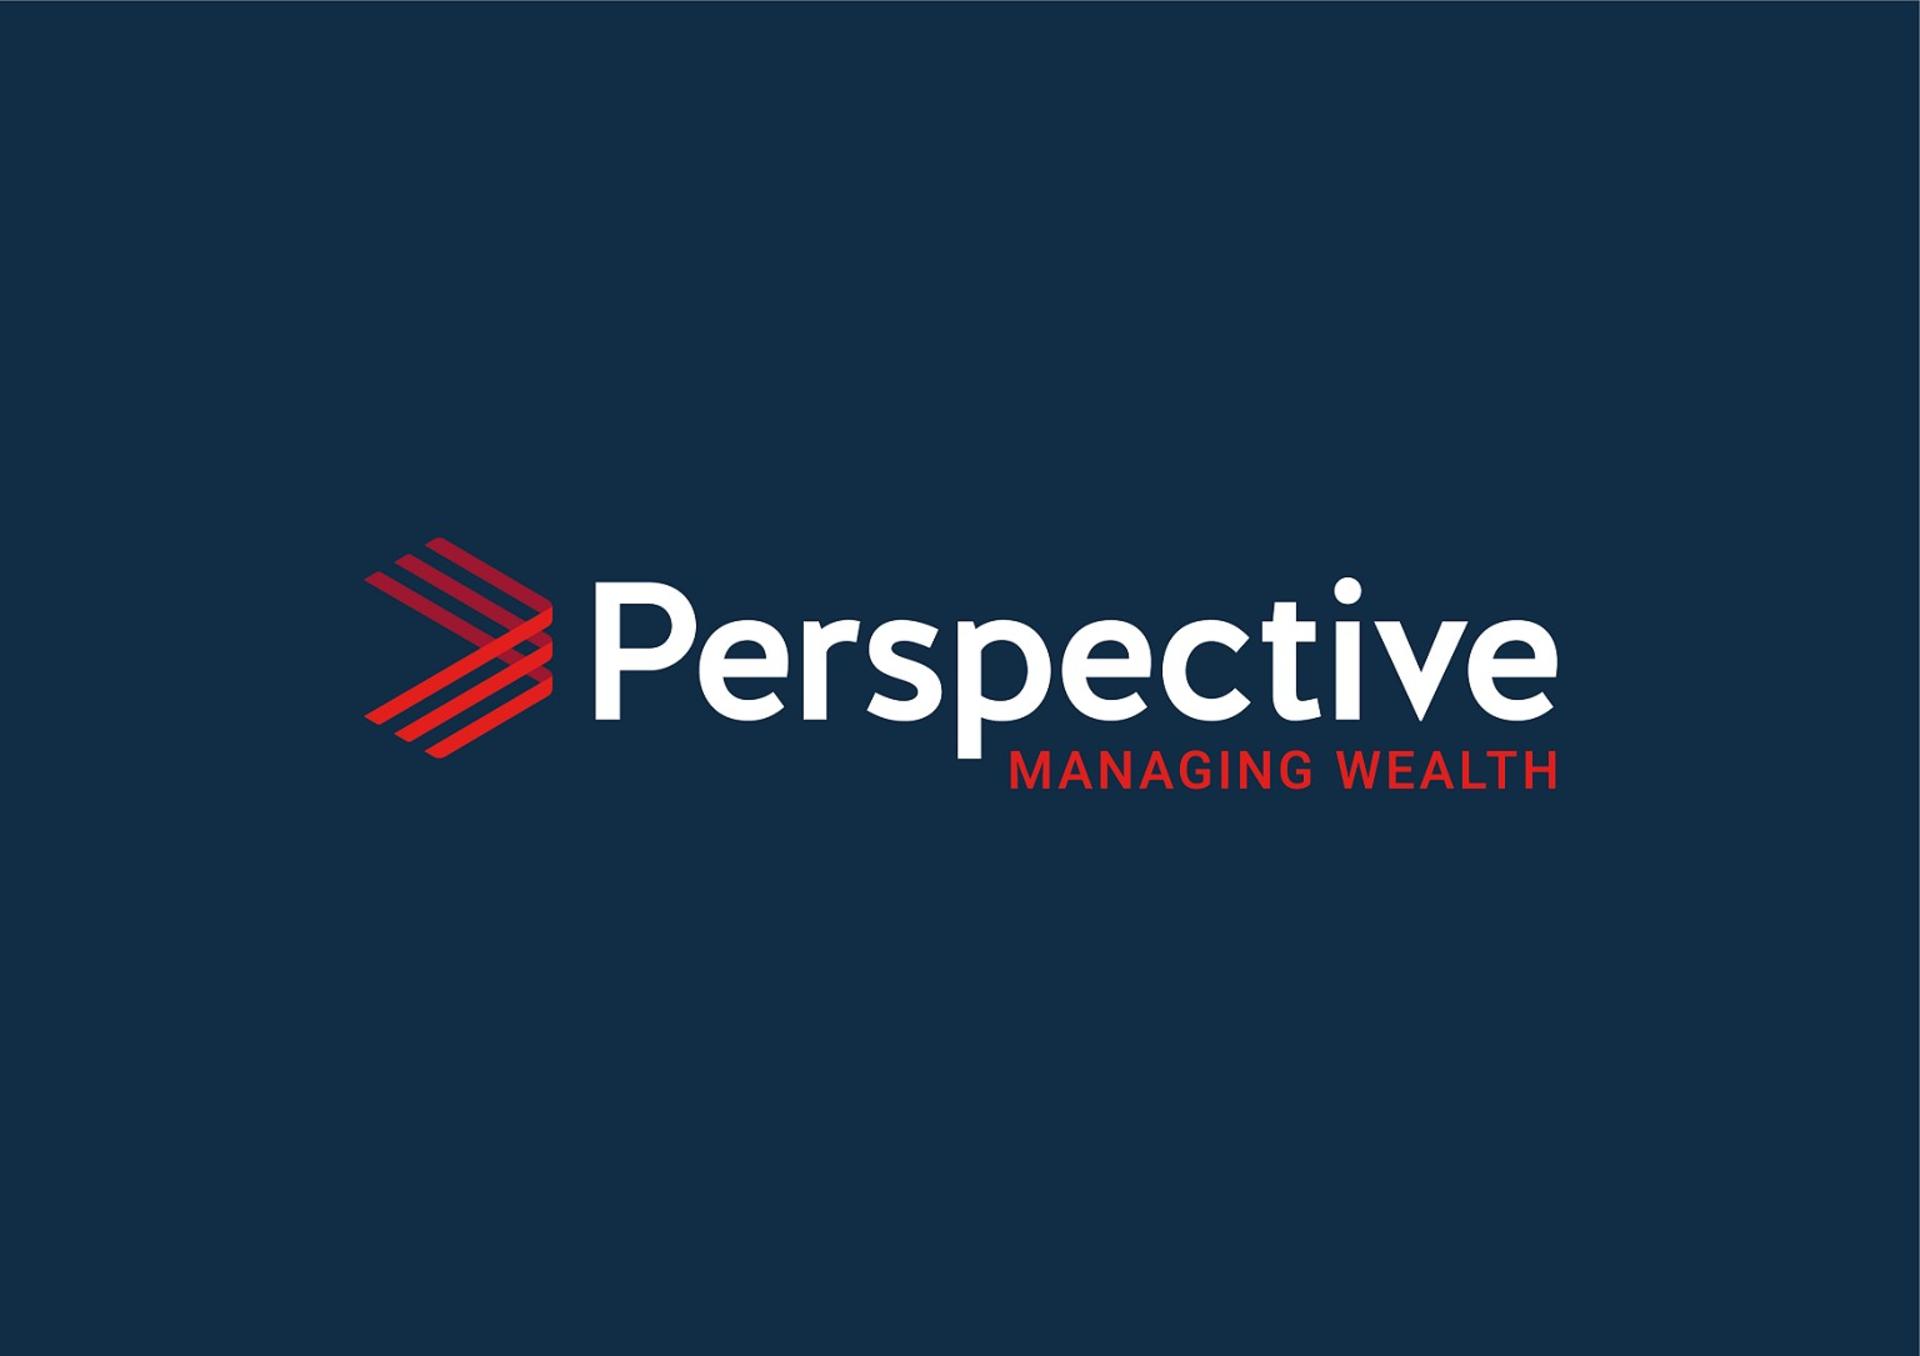 Perspective makes seventh acquisition of 2021 as advice M&amp;A surge continues